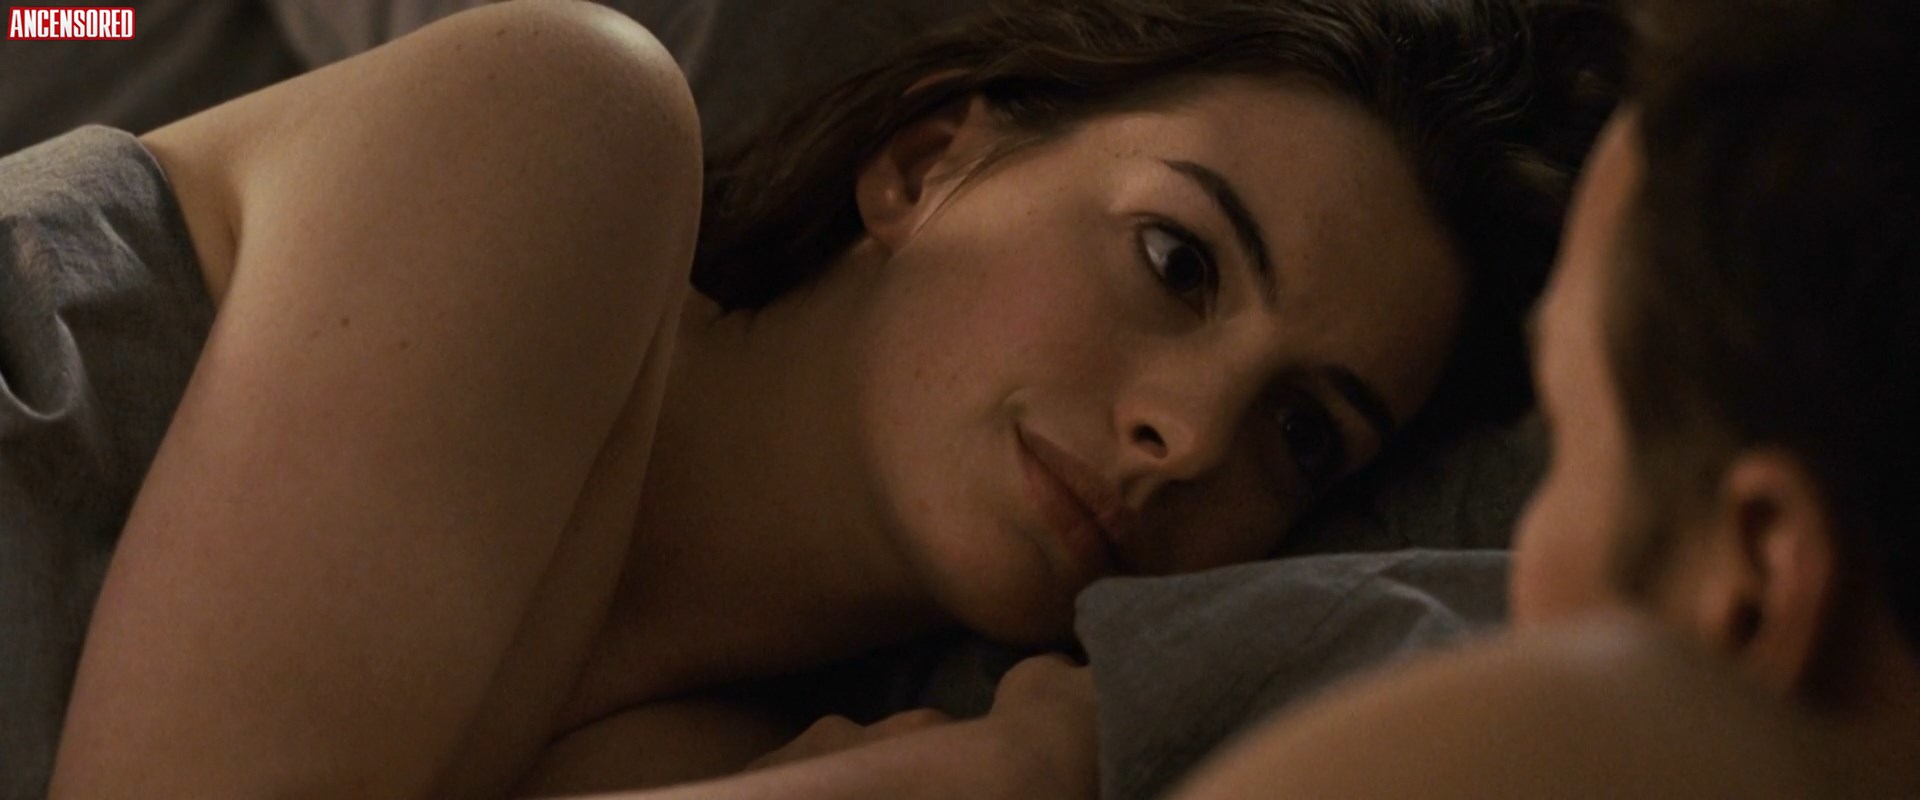 Anne Hathaway nude pics.